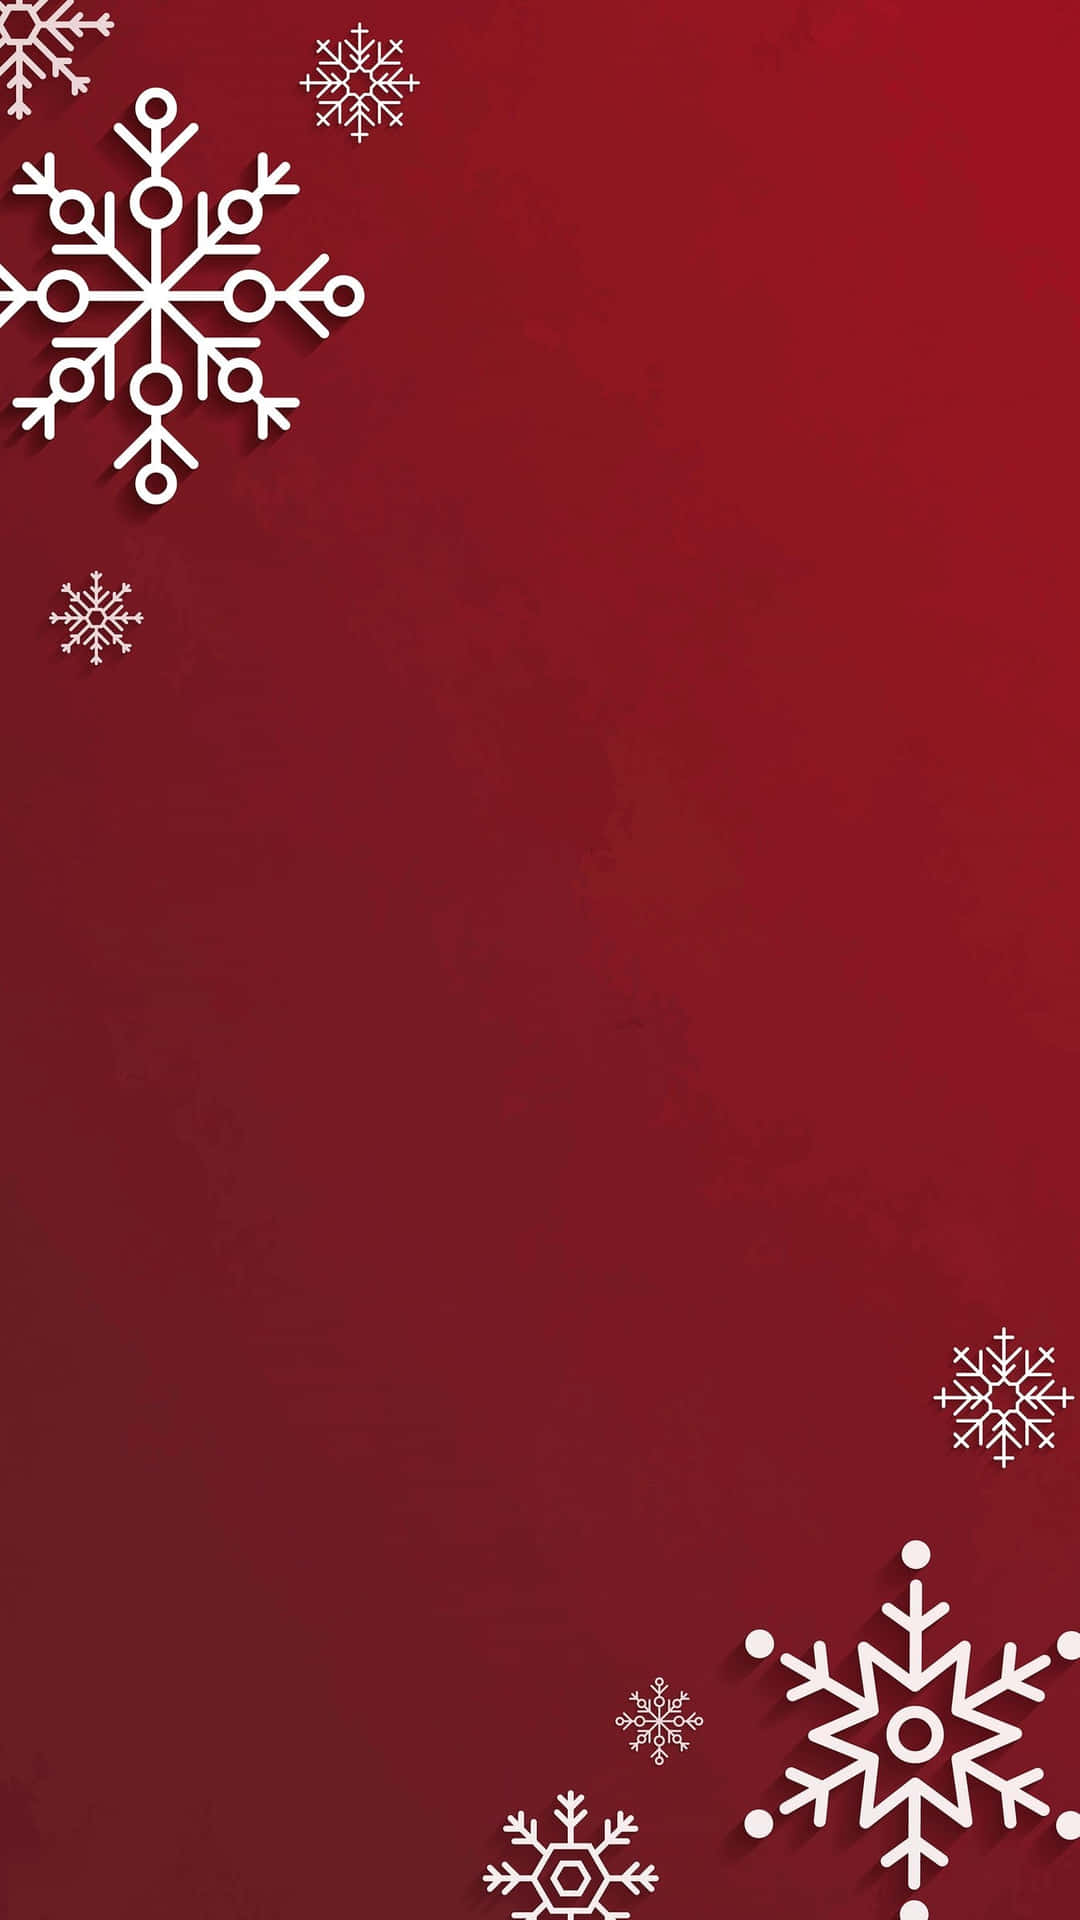 Celebrate the holidays with a festive red Christmas background